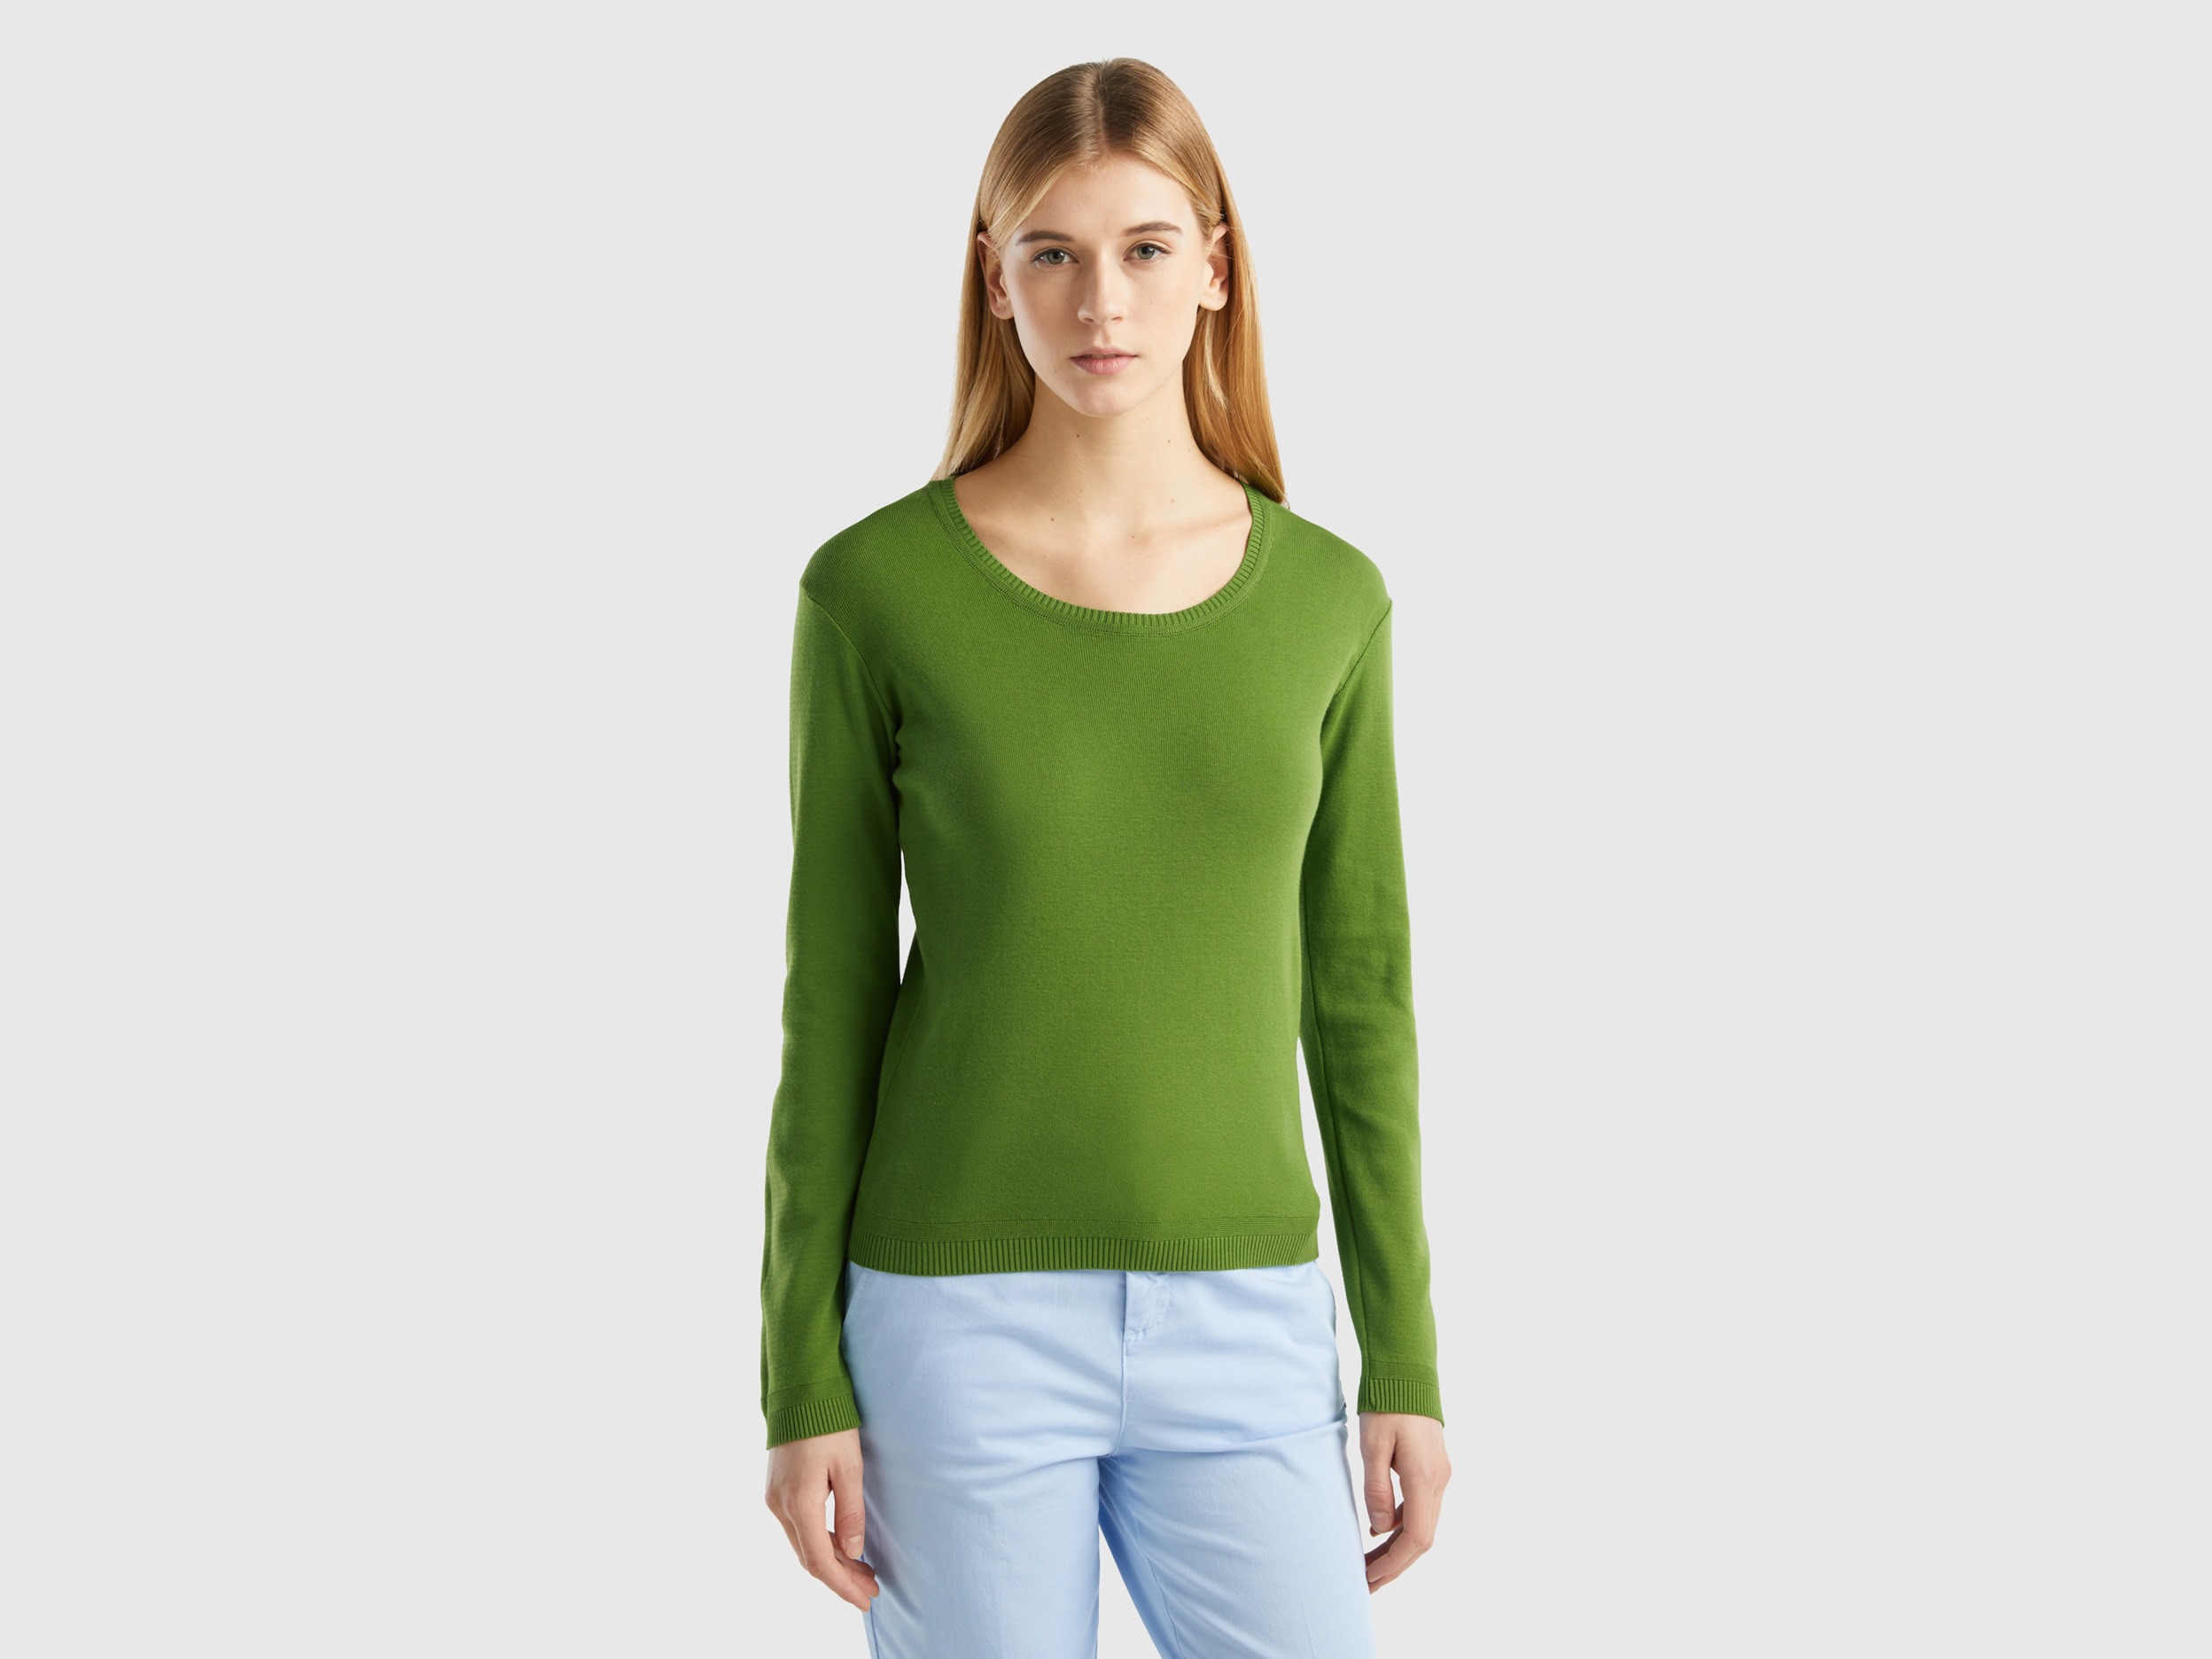 Benetton, Crew Neck Sweater In Pure Cotton, size XS, Military Green, Women